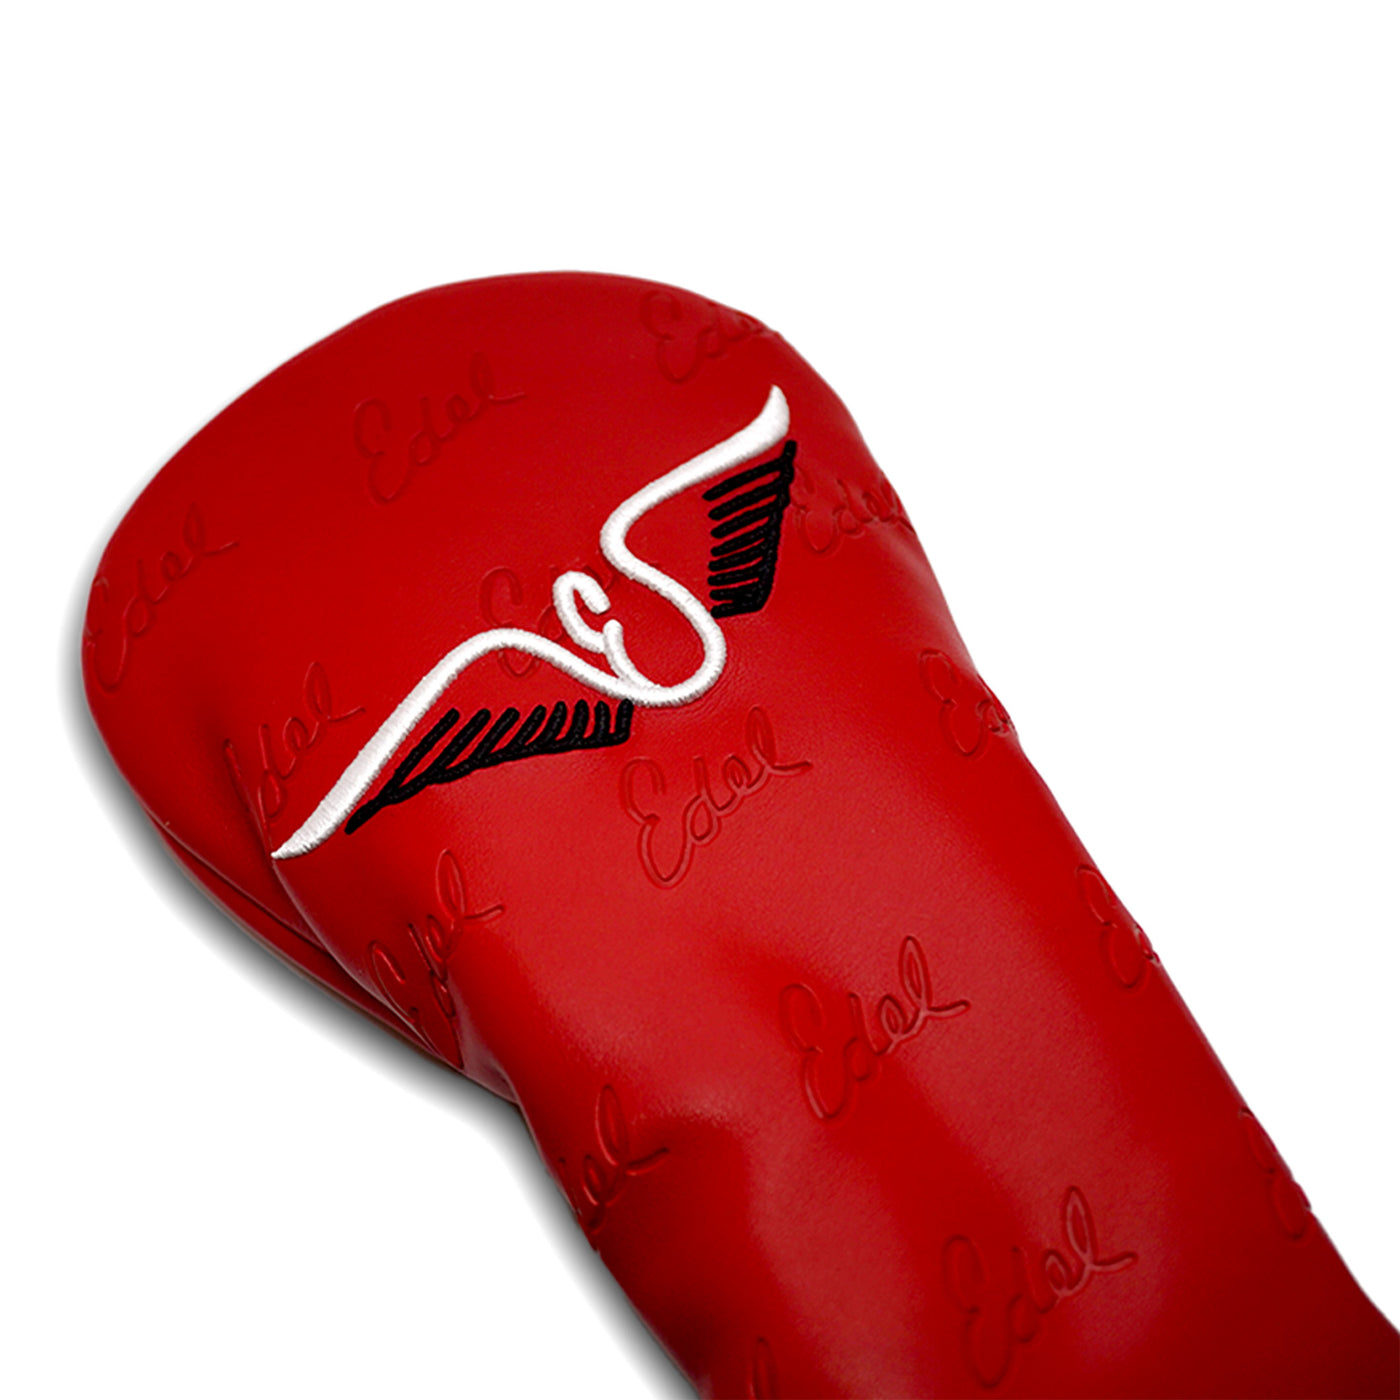 Edel Golf Fairway Wood Headcover Red Close-Up